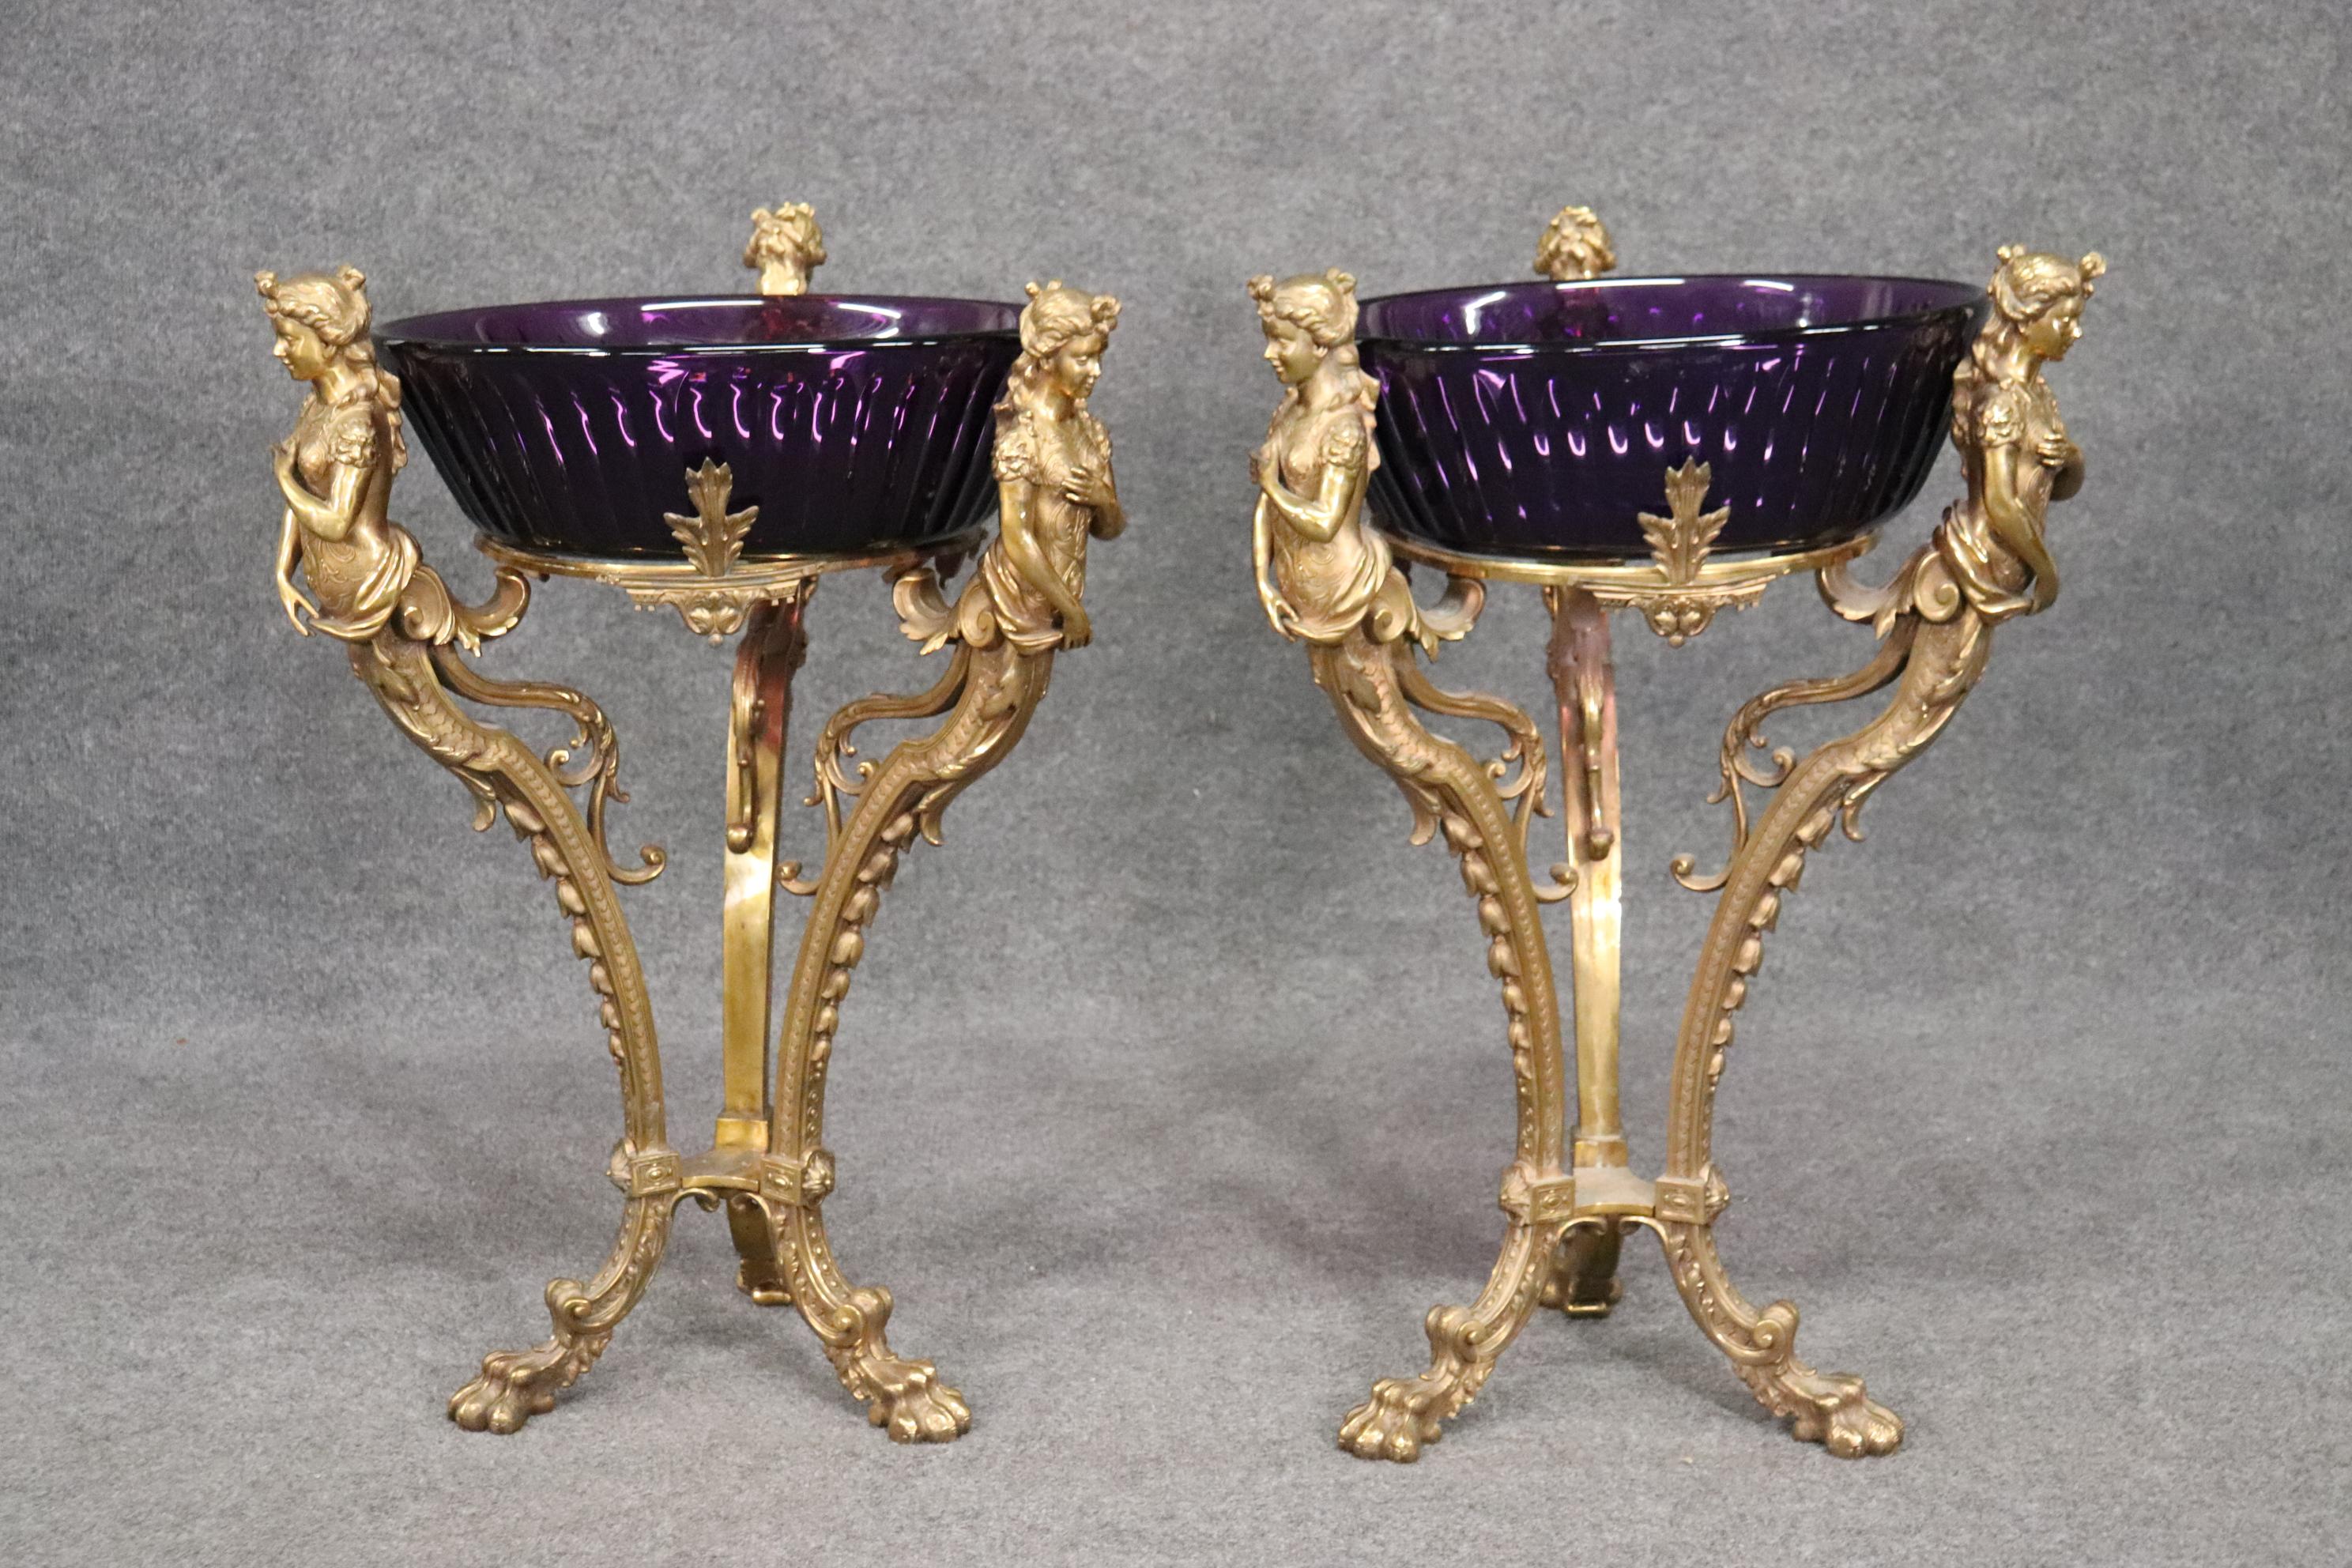 Neoclassical Revival Best Figural Bronze Russian Amethyst Cut Glass Wine Cooler Stands  For Sale